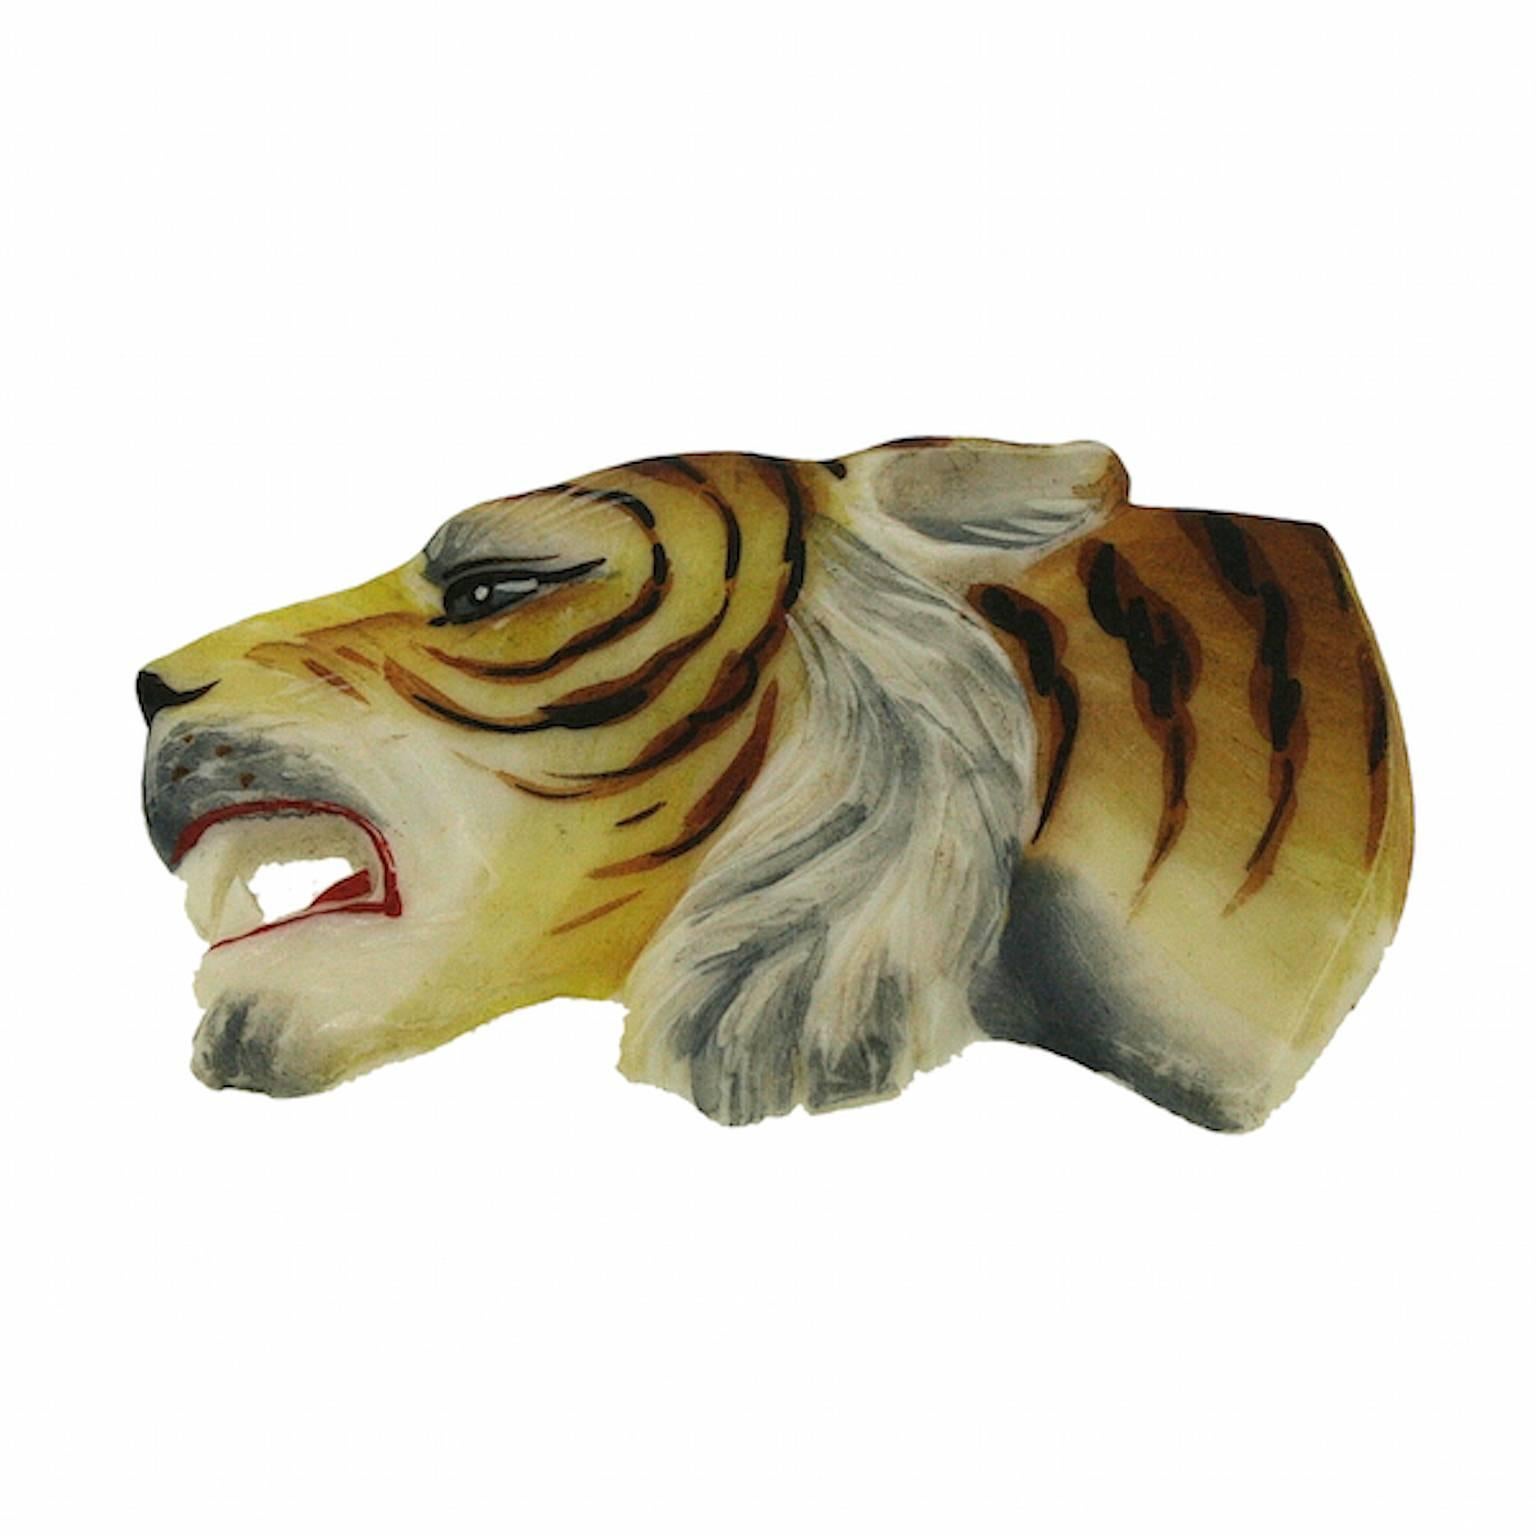 Featuring a vibrant and evocative design, this wonderful brooch dates from the 1930s.
Condition Report:
Excellent
The Details...
This brooch is constructed from celluloid and is hand painted and carved to resemble a tiger. The brooch fastens with a